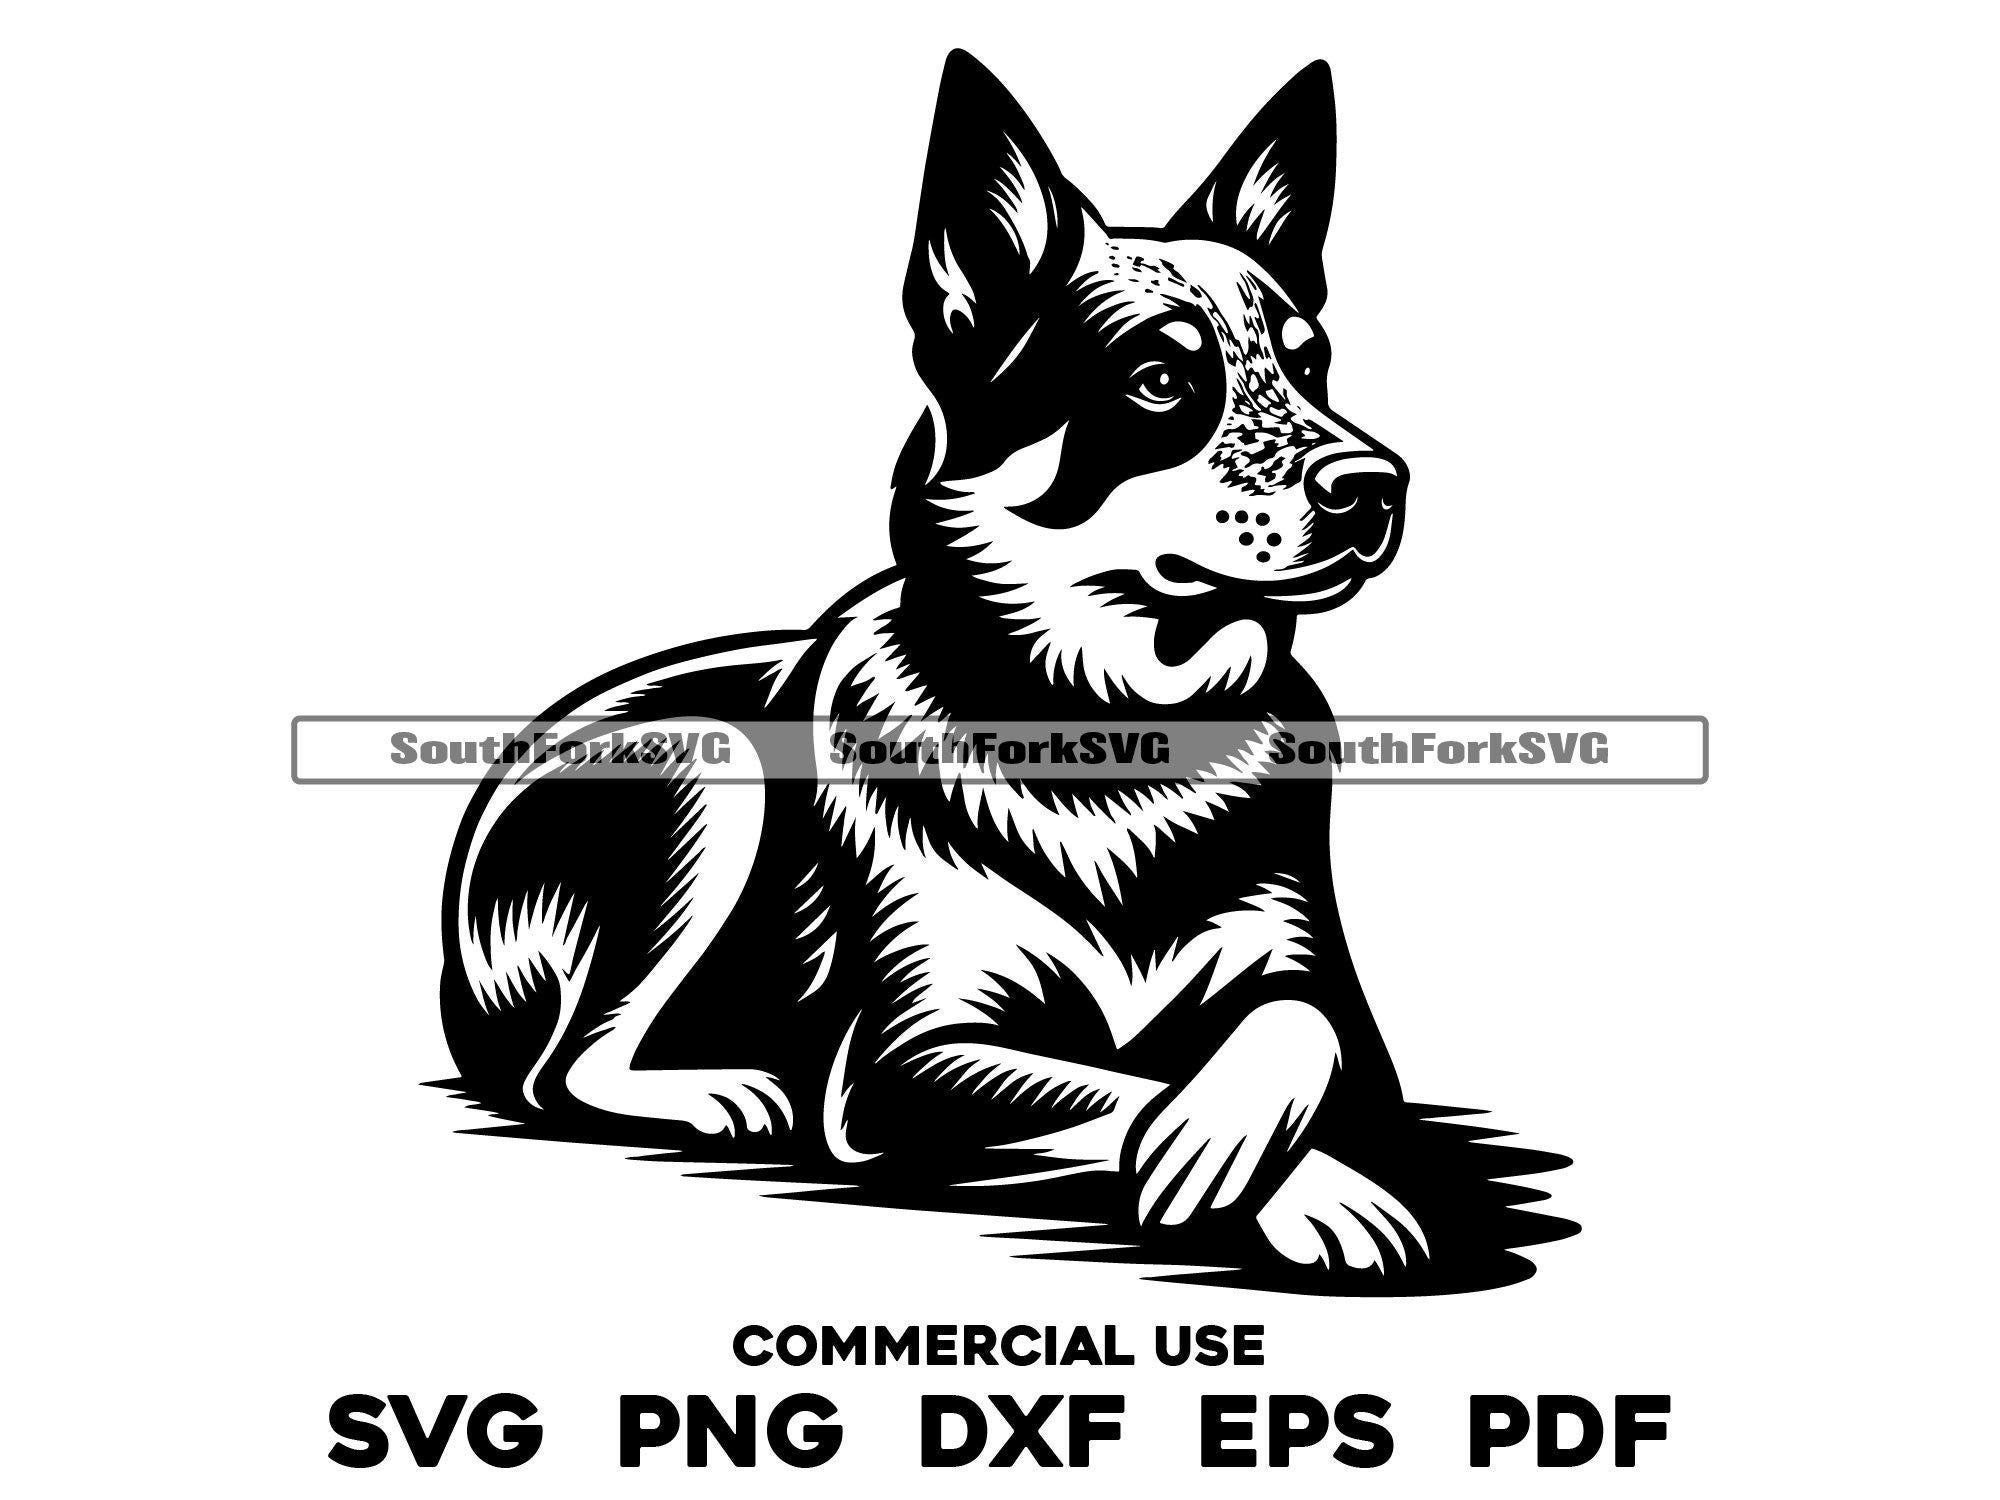 Blue Heeler Laying Crossed Paws Design svg png dxf eps pdf | vector graphic cut file laser clip art instant digital download commercial use